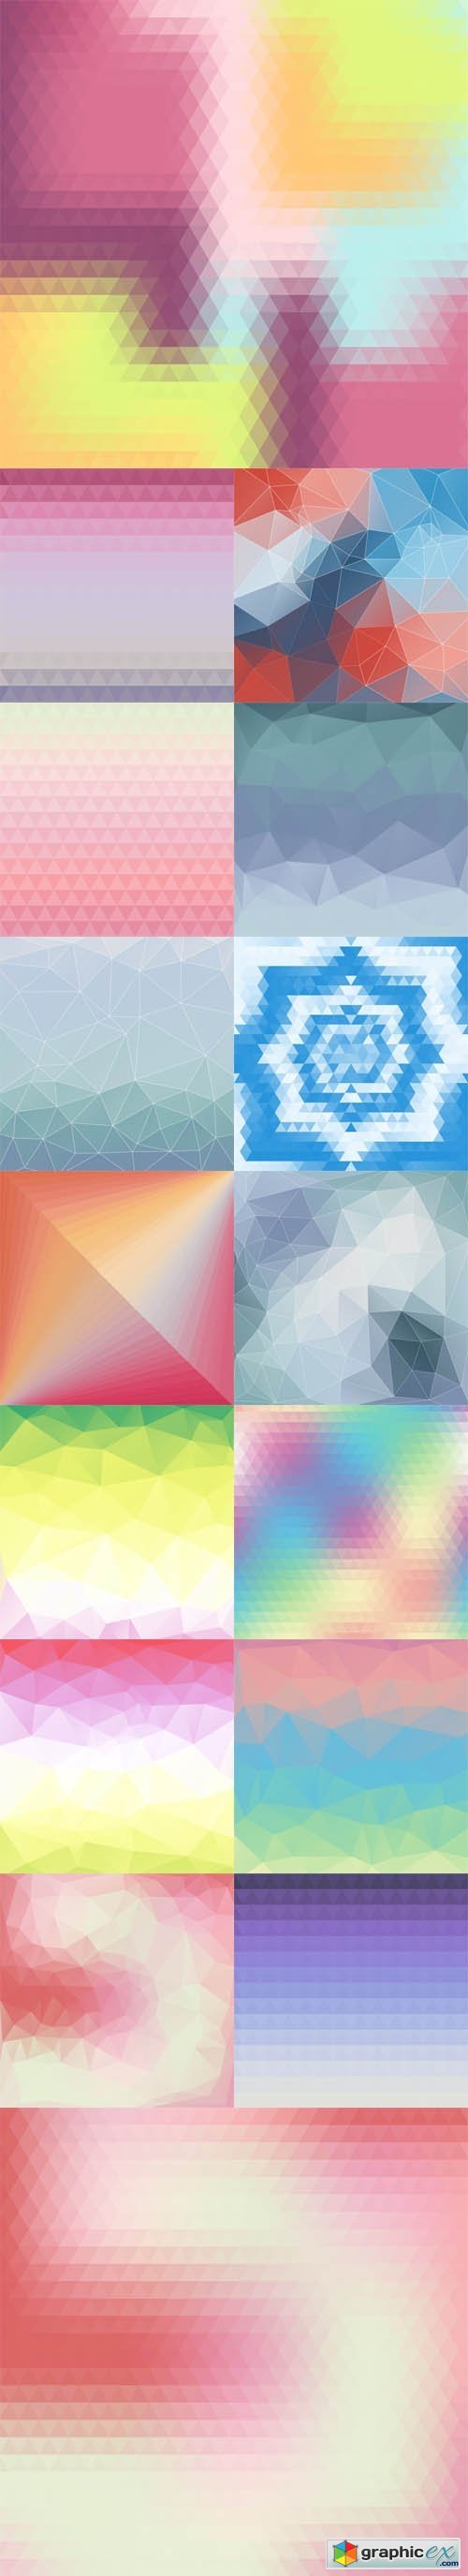 Abstract Colorful Background of Triangles